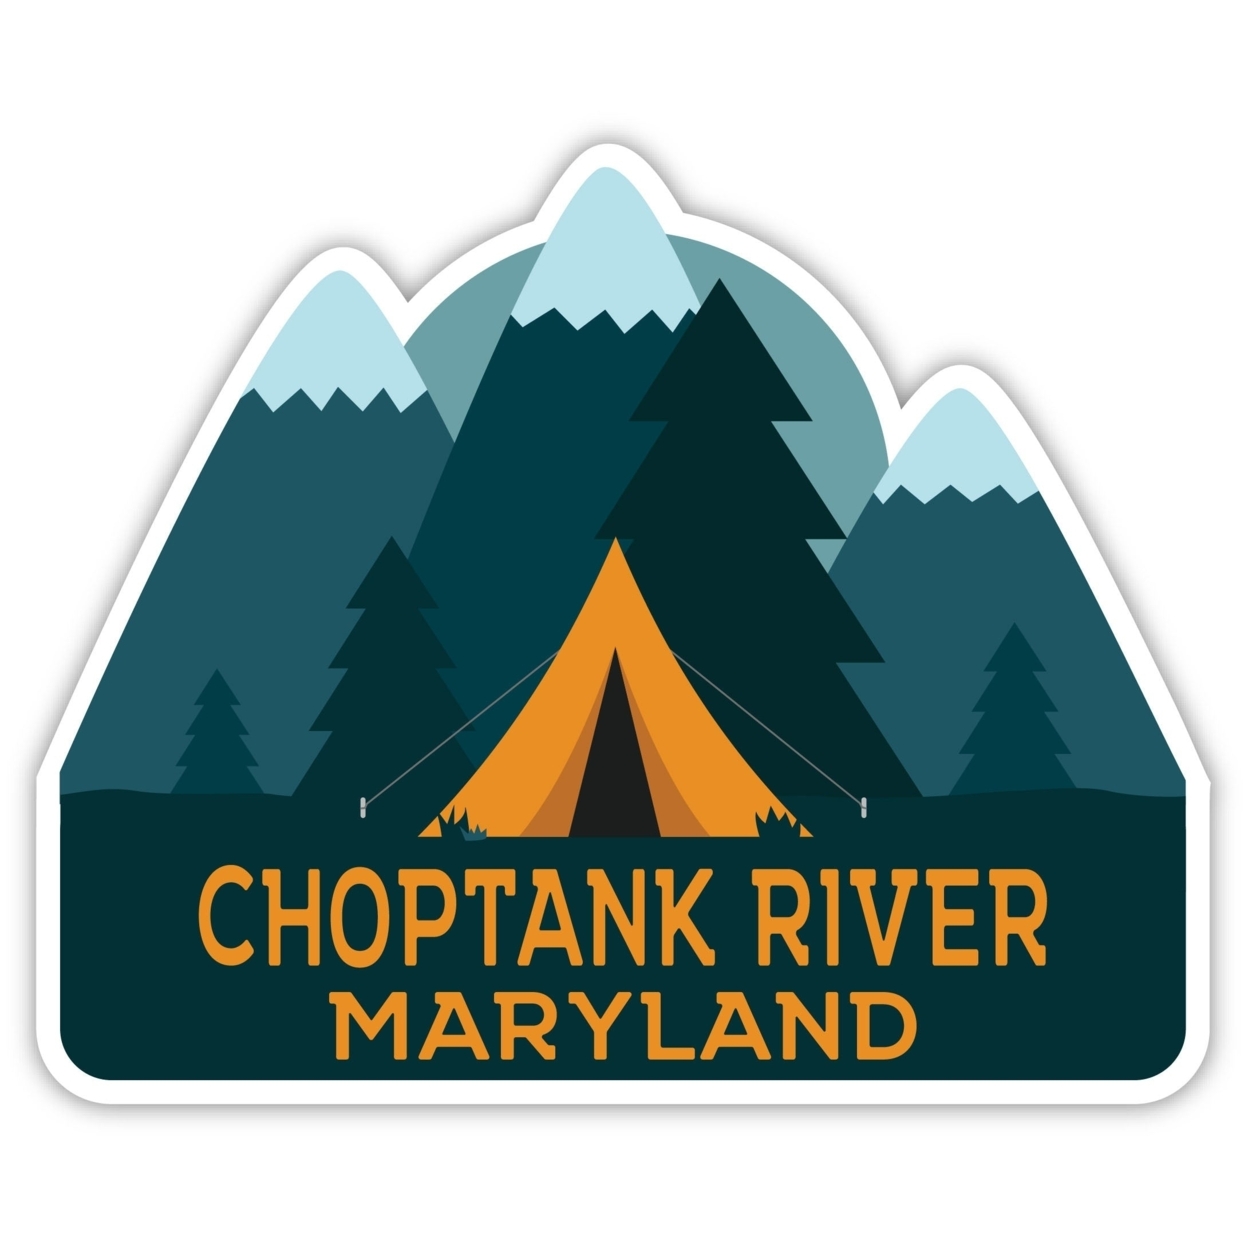 Choptank River Maryland Souvenir Decorative Stickers (Choose Theme And Size) - 4-Pack, 6-Inch, Tent